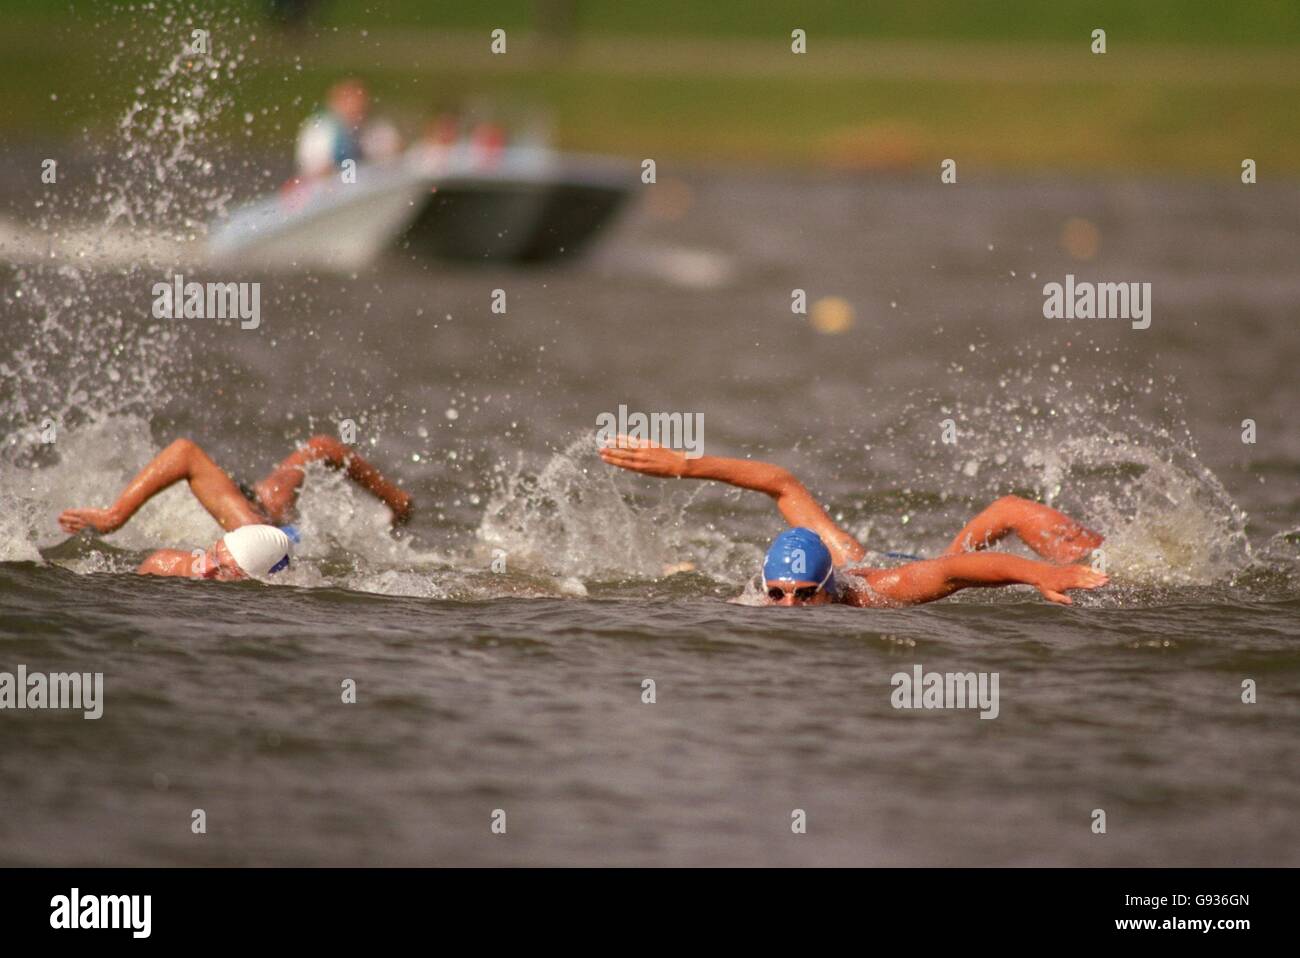 Swimming - Euro Long Distance Swimming Cup - Holme Pierrepoint, Nottingham. The loading pack in the Men's 5km Race Stock Photo